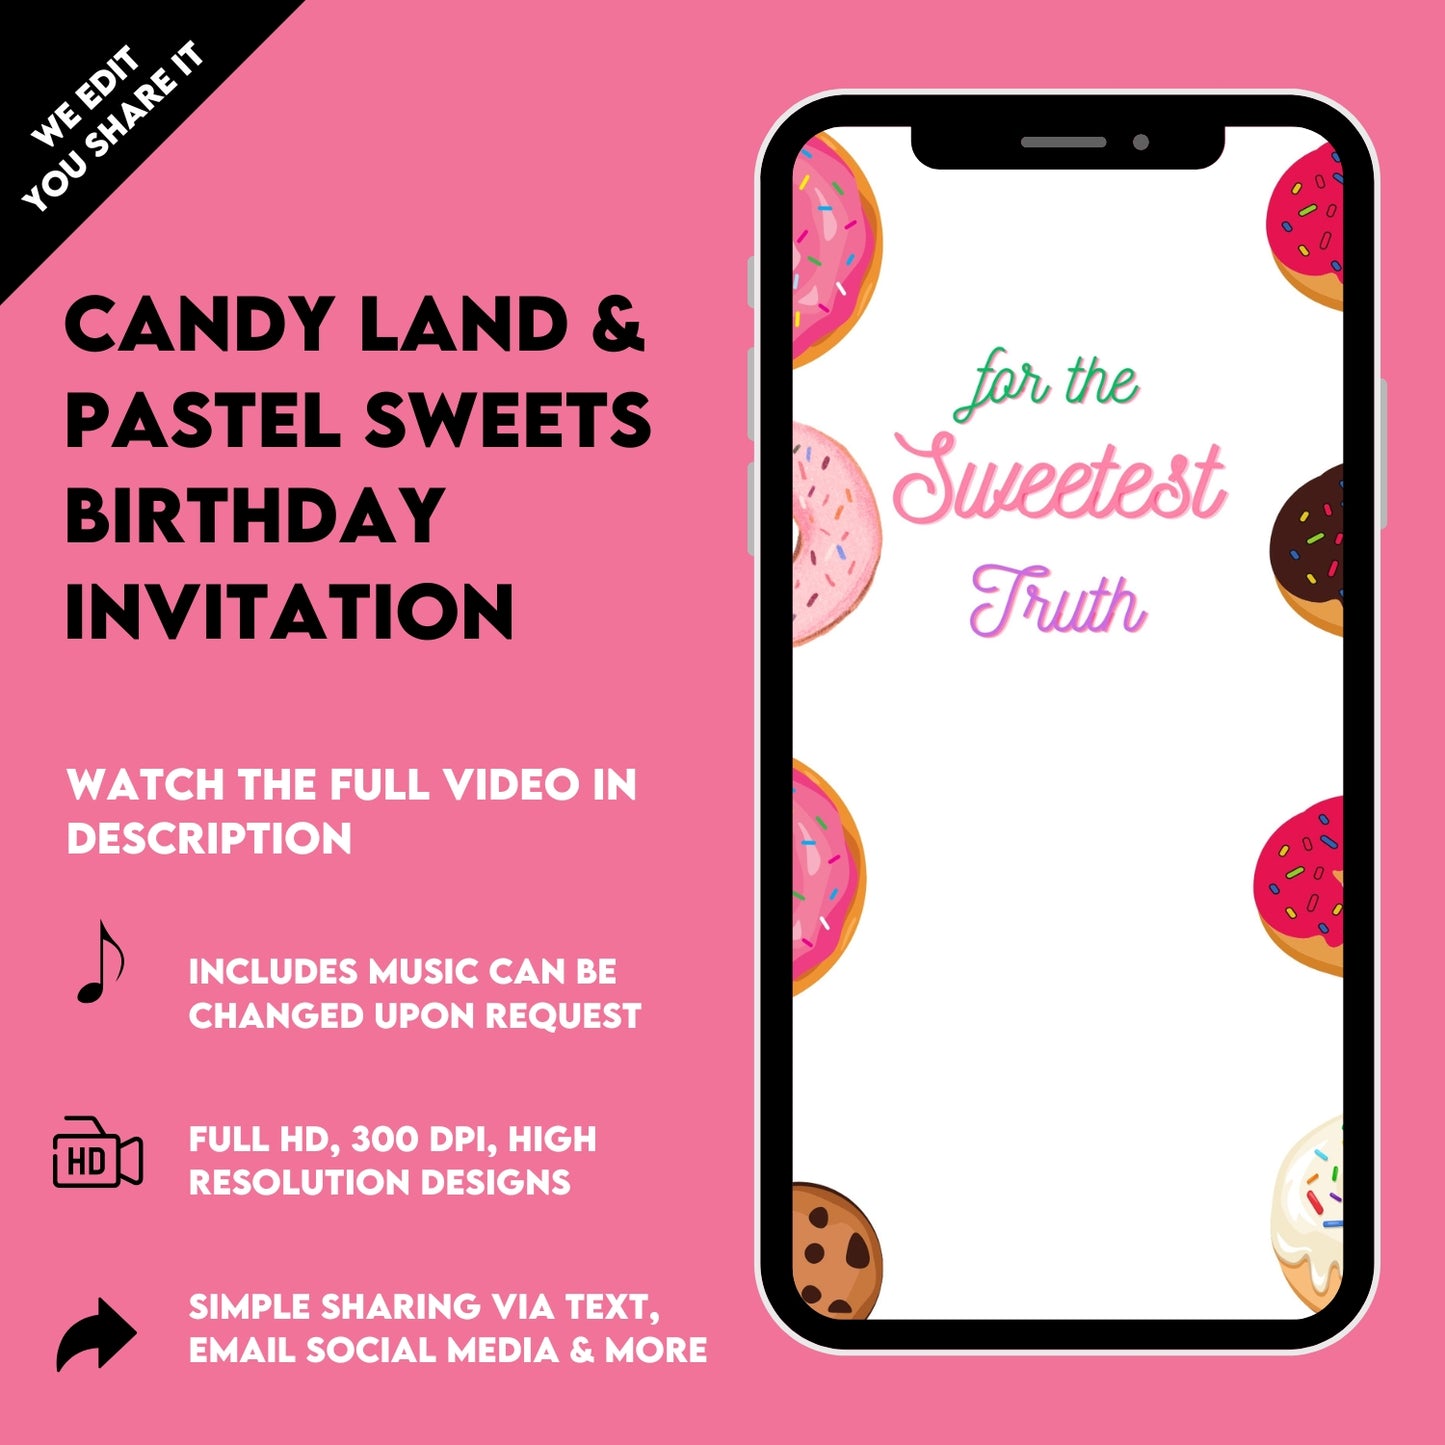 Sweets Birthday Video Invitation - Candy Land & Pastel Sweets